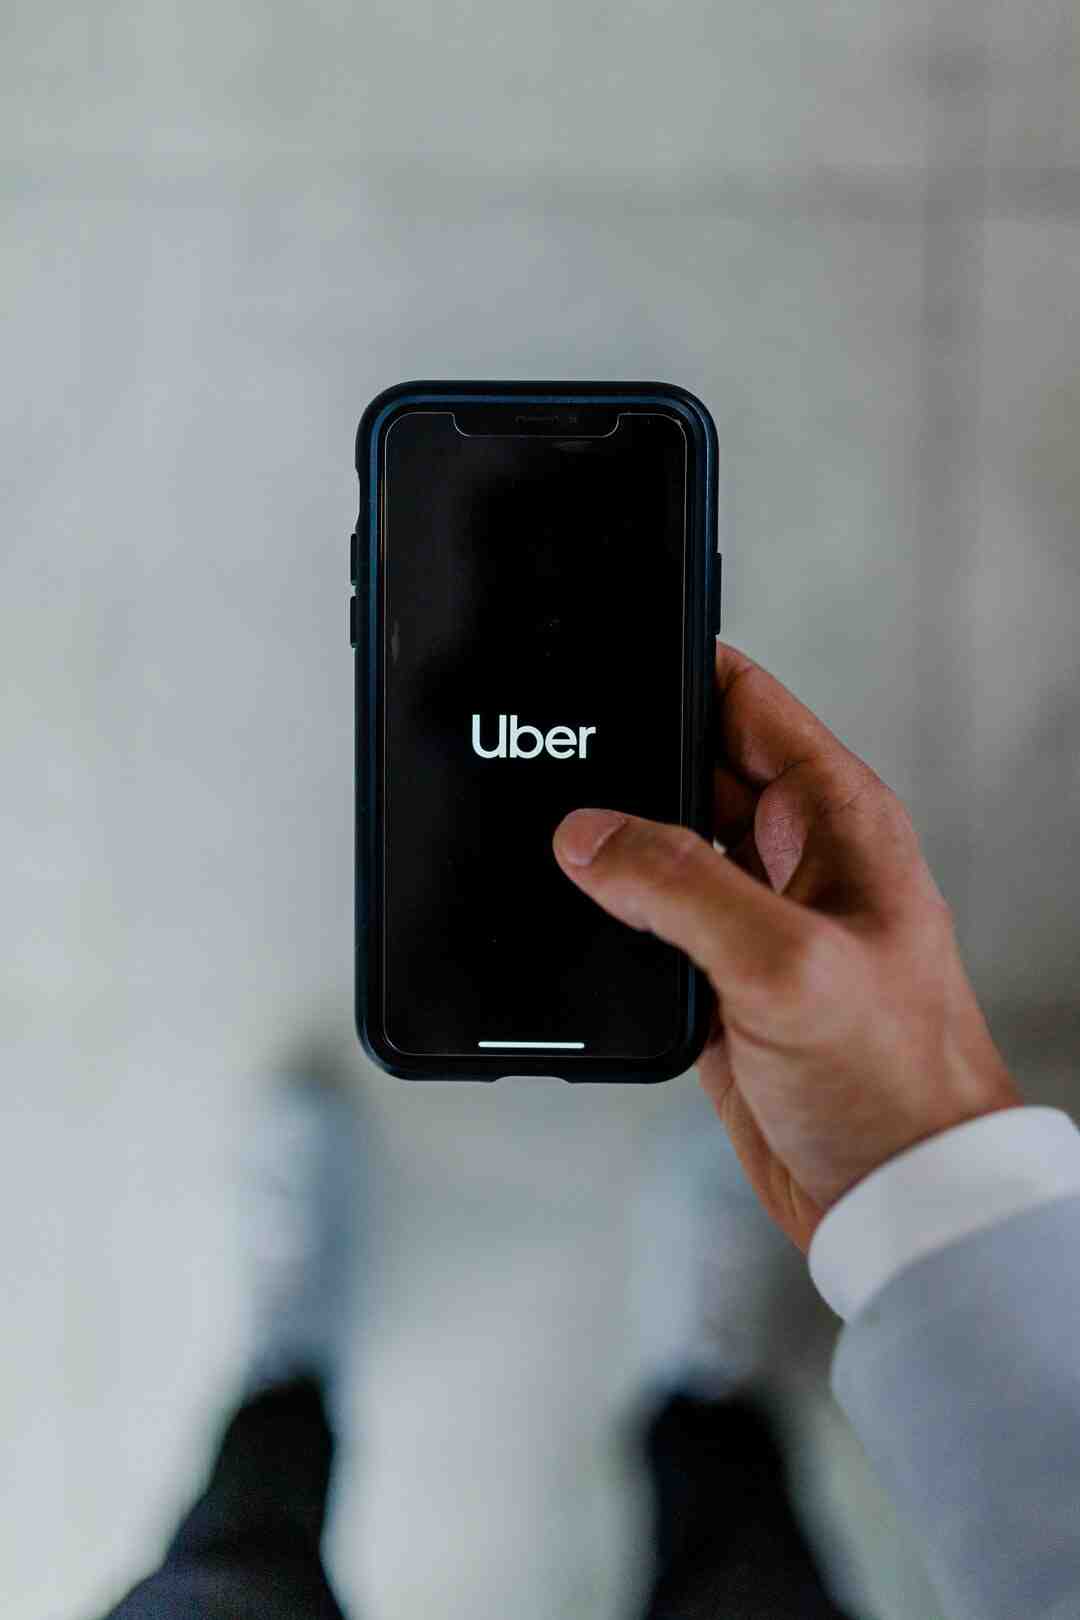 Why does über not work?